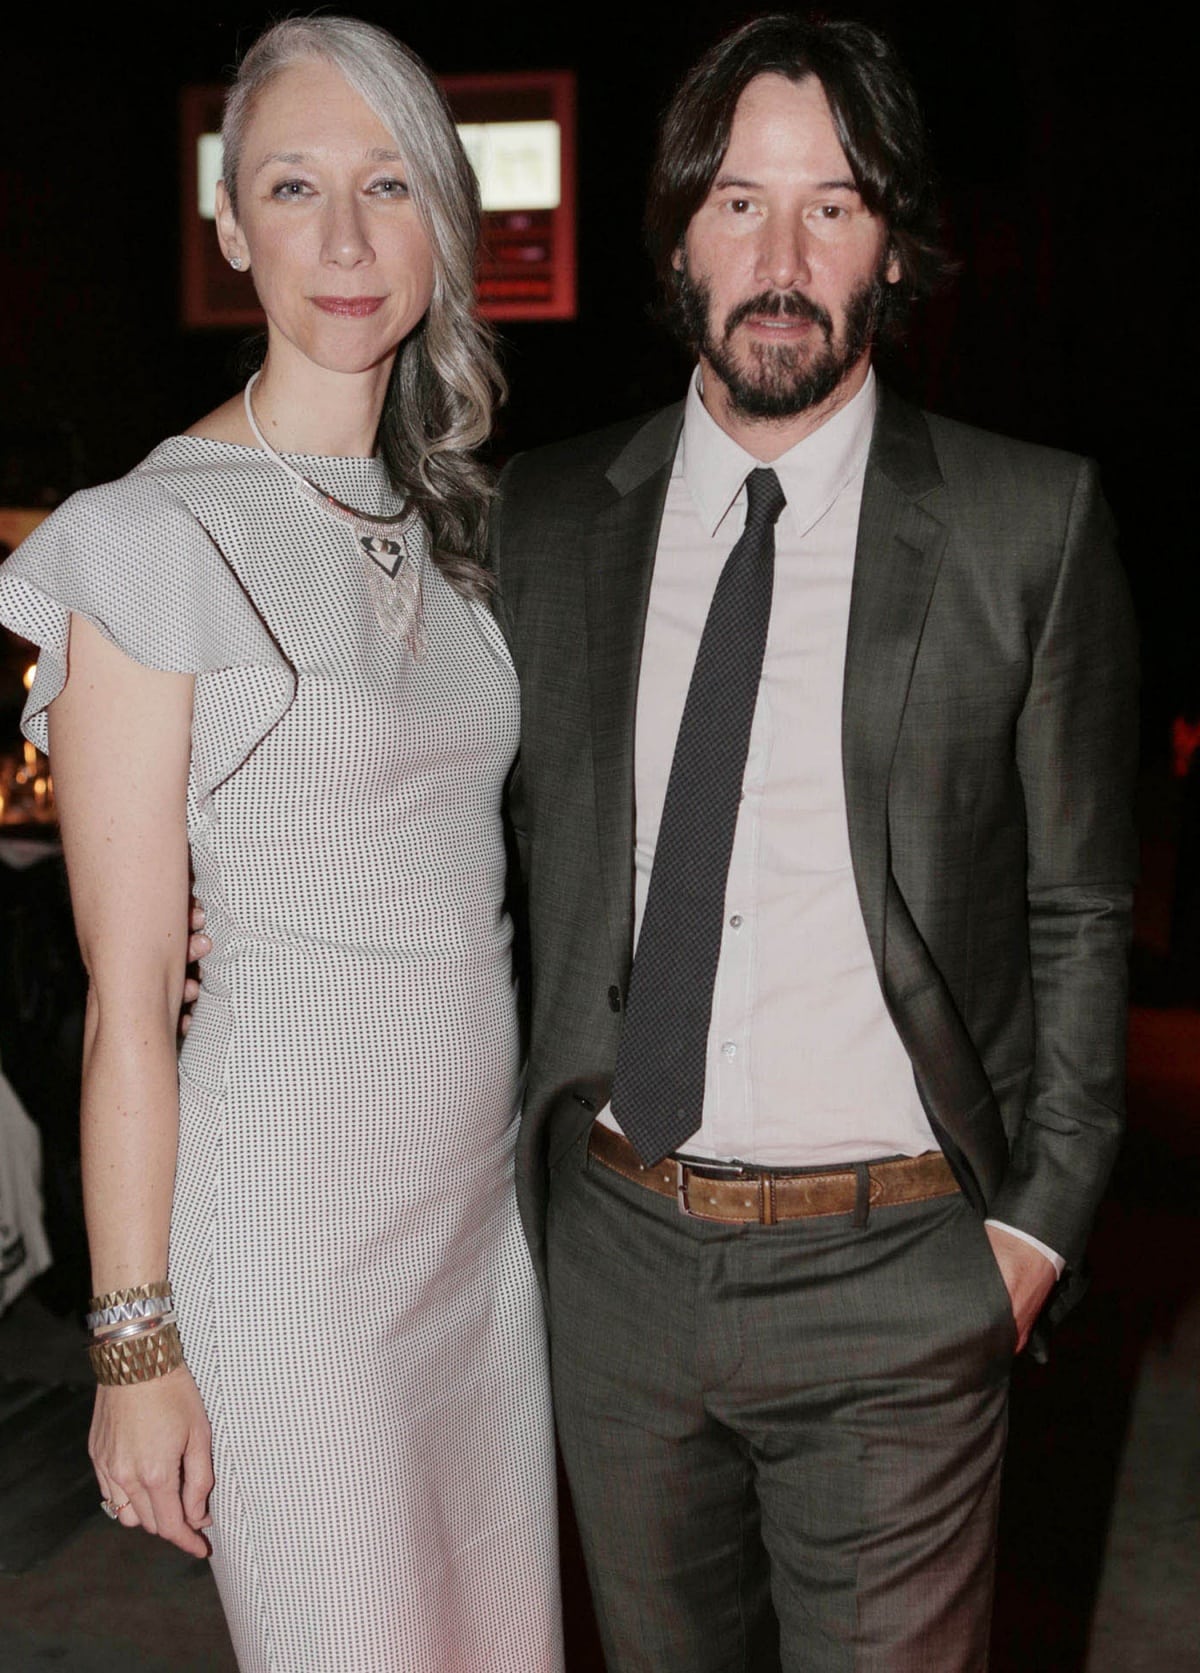 Alexandra Grant and Keanu Reeves looked lovely together as they posed for photographs at the UNAIDS Gala during Art Basel 2016